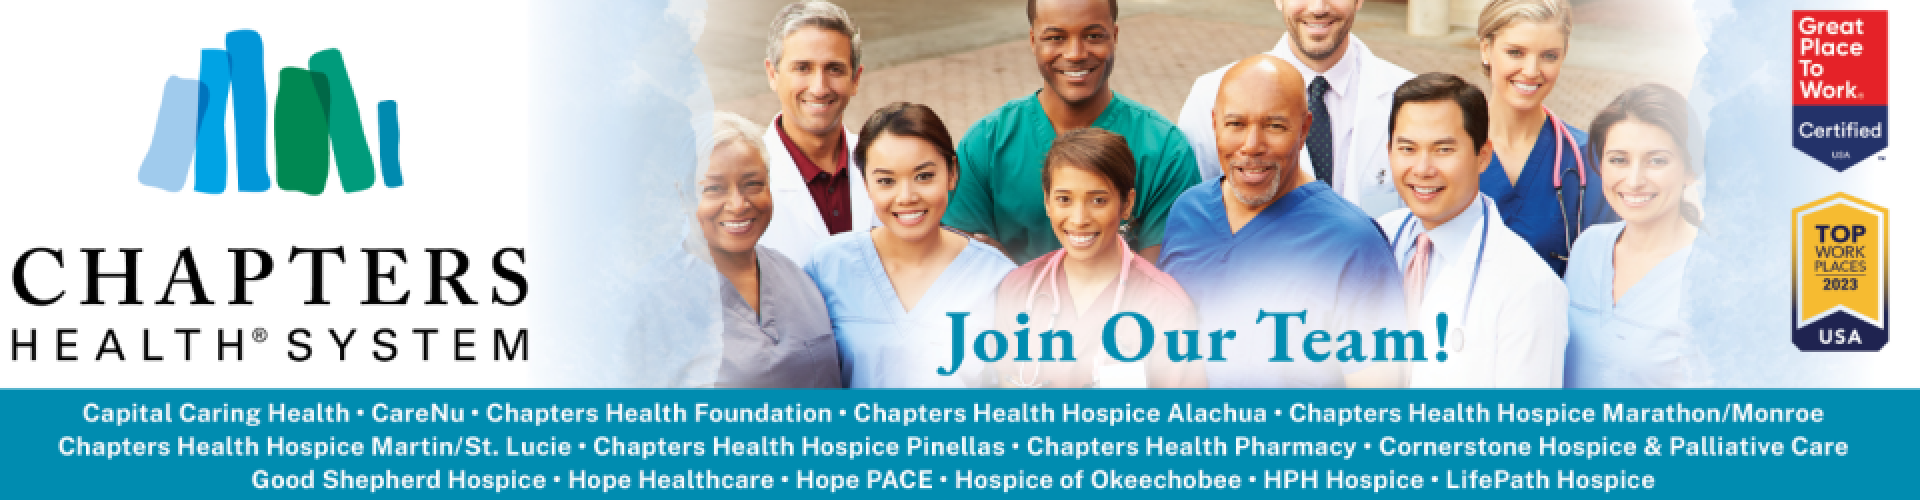 Chapters Health System cover